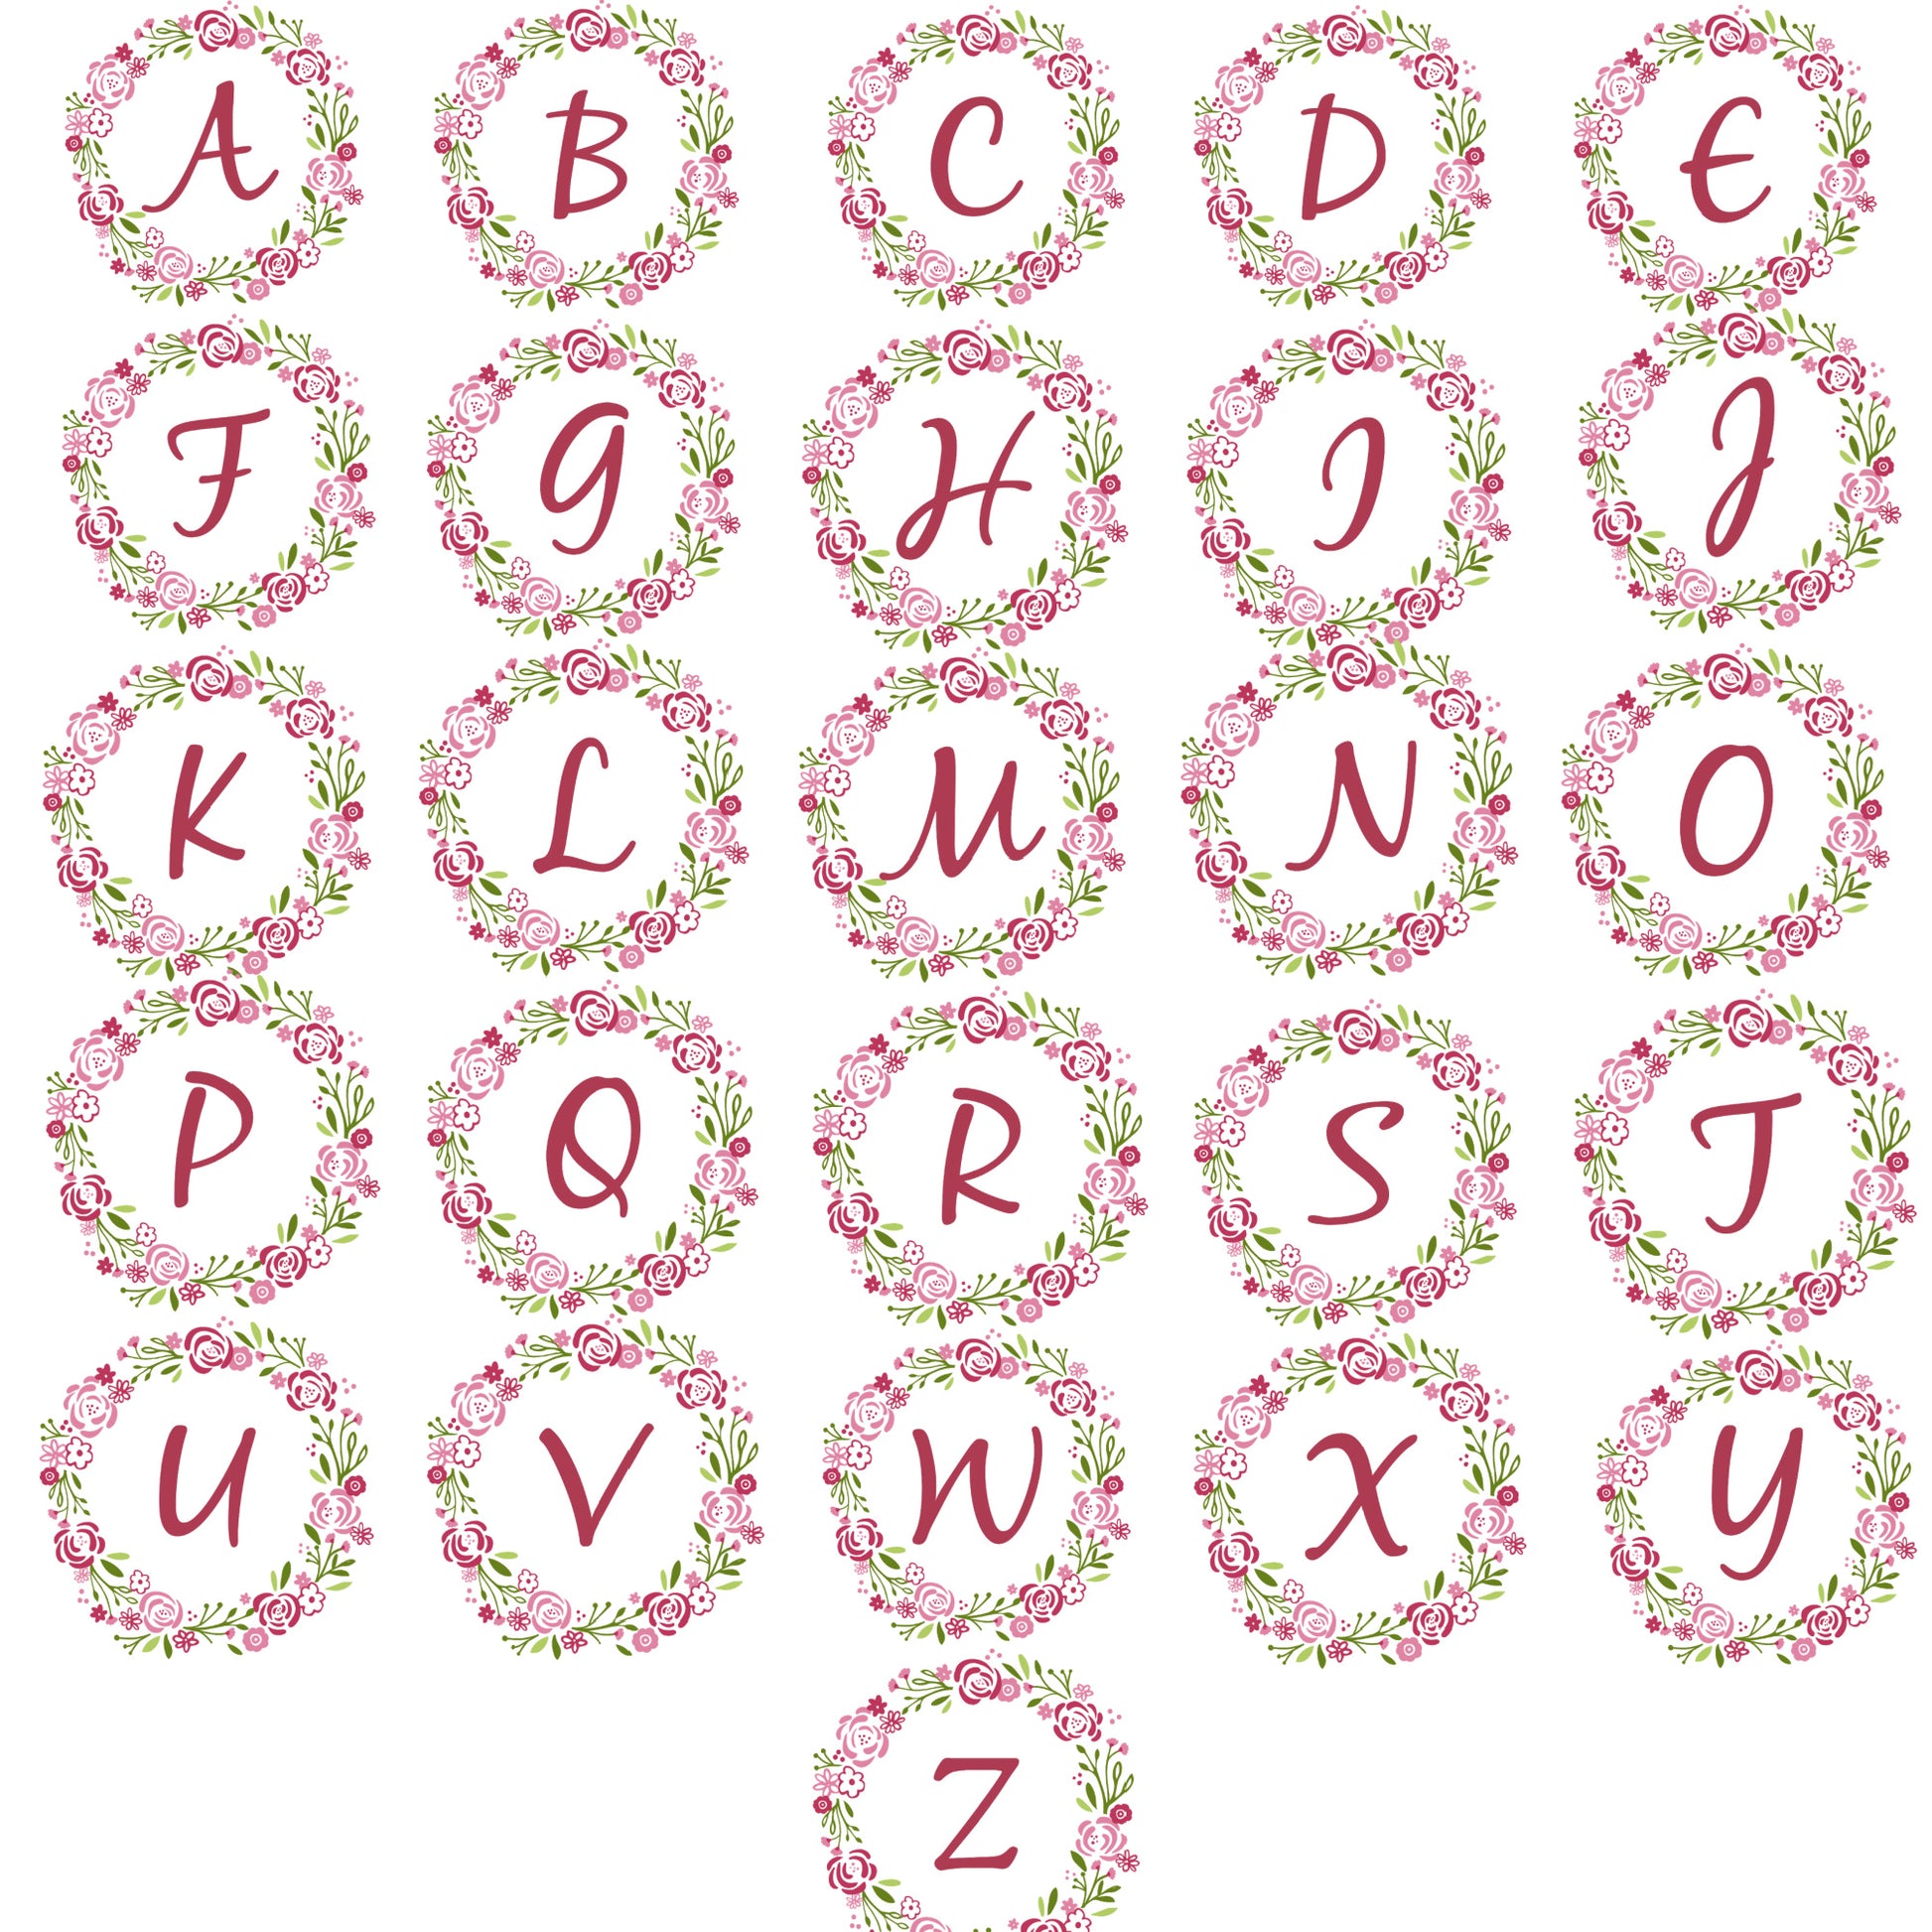 Photo of the Alphabet from A to Z